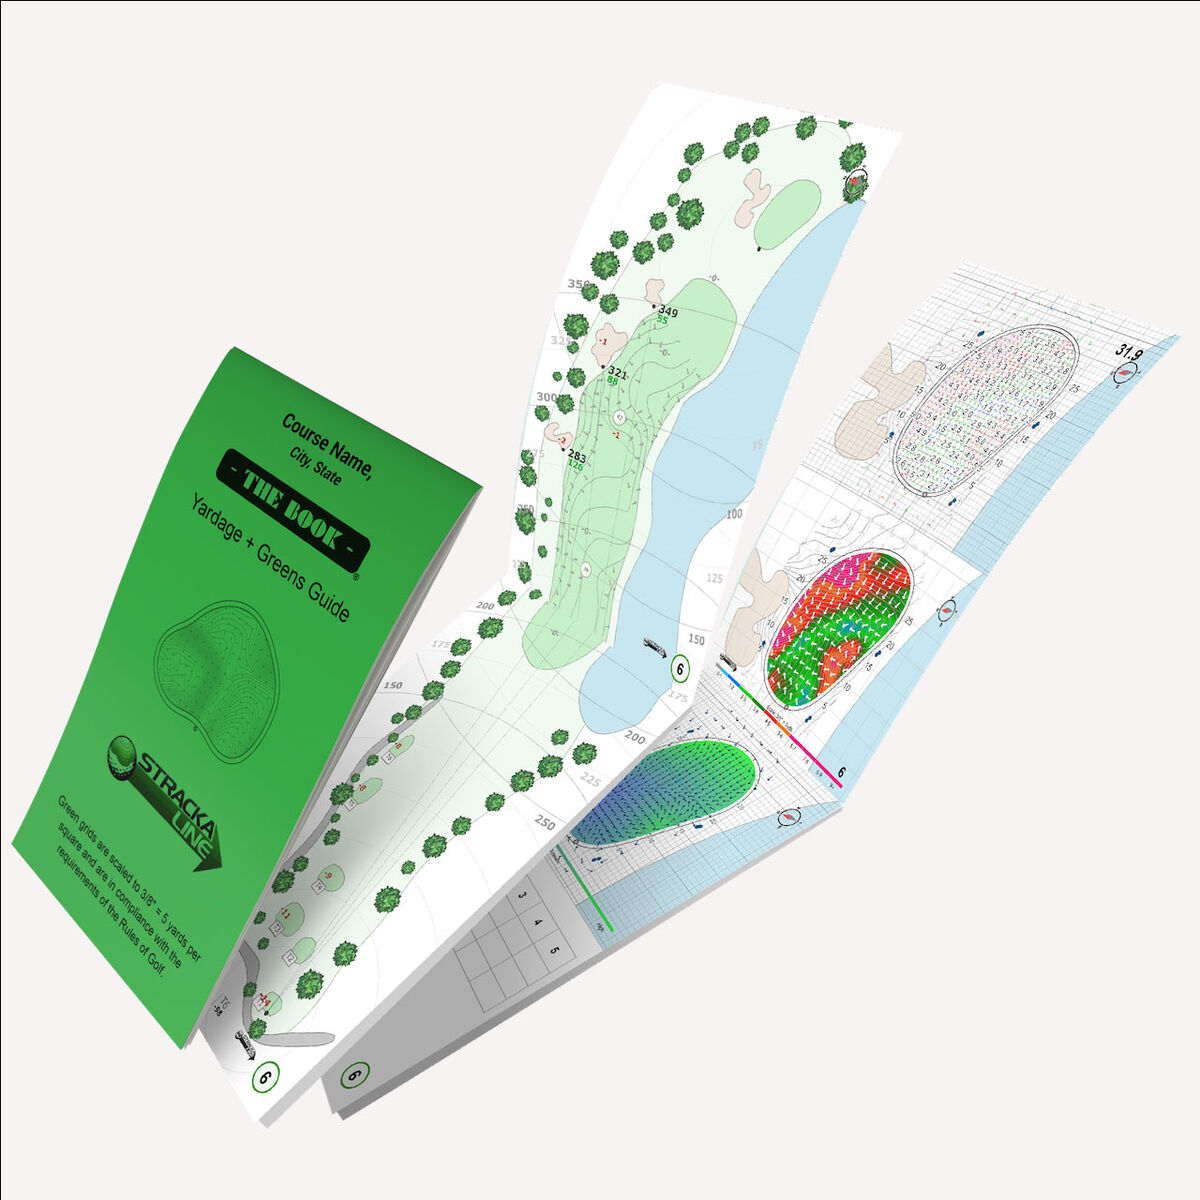 StrackaLine yardage book and greens guide